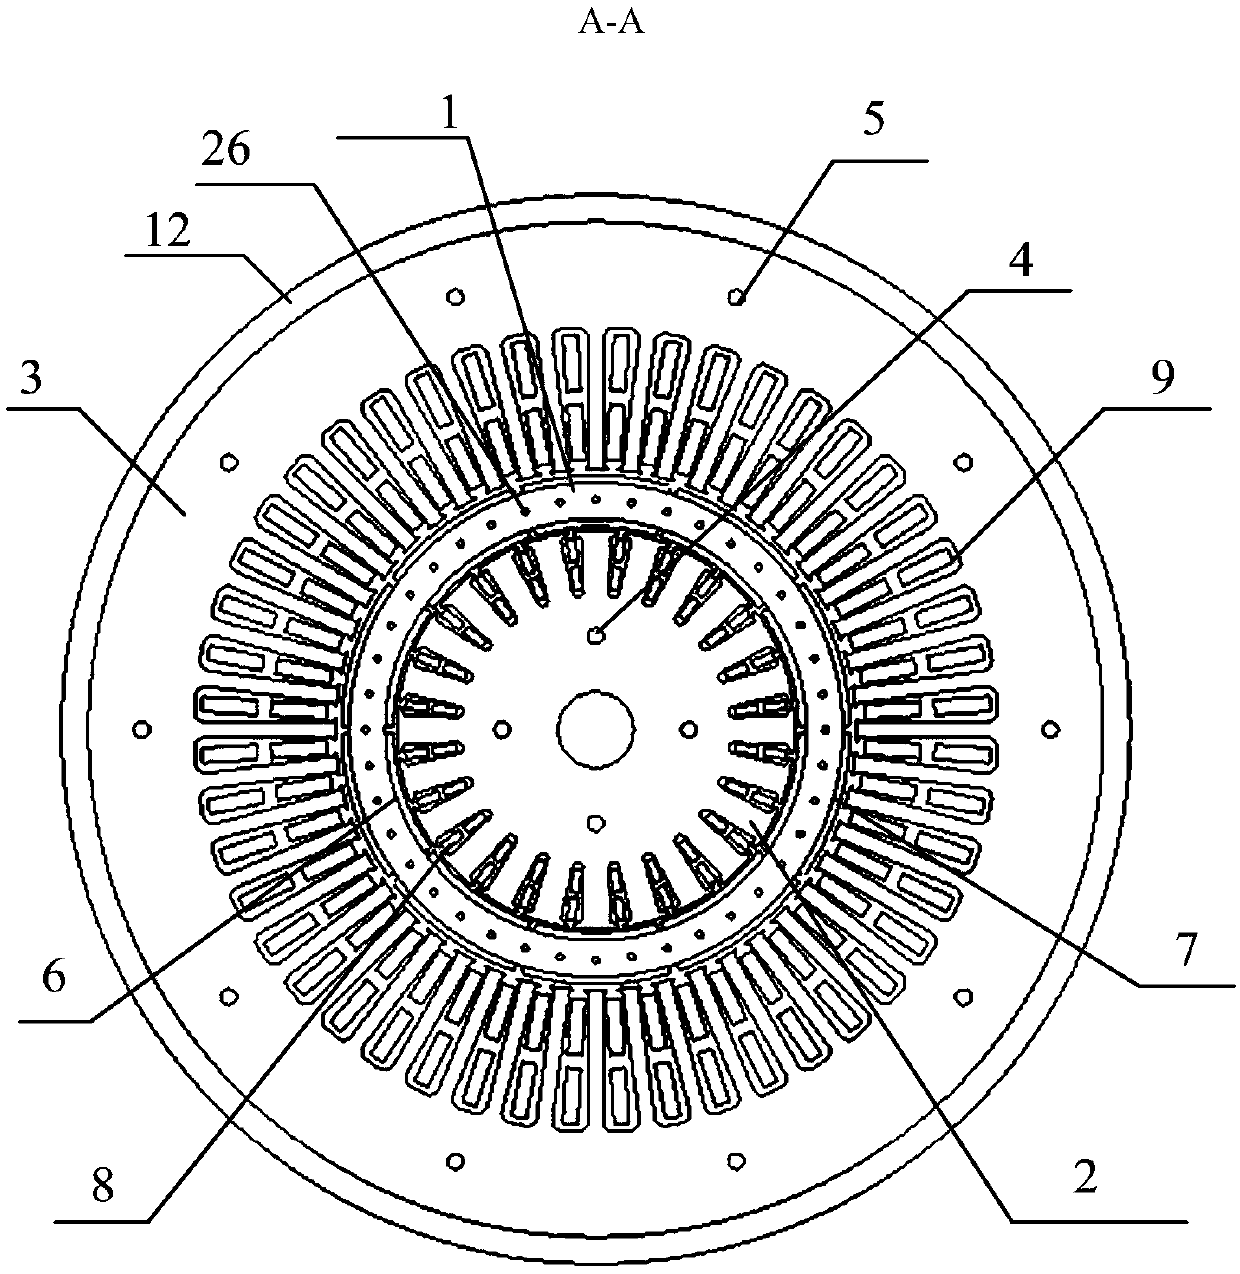 Double-stator and barrel-type permanent magnet rotor accelerator with closed cycle multi-channel counterflow cooling